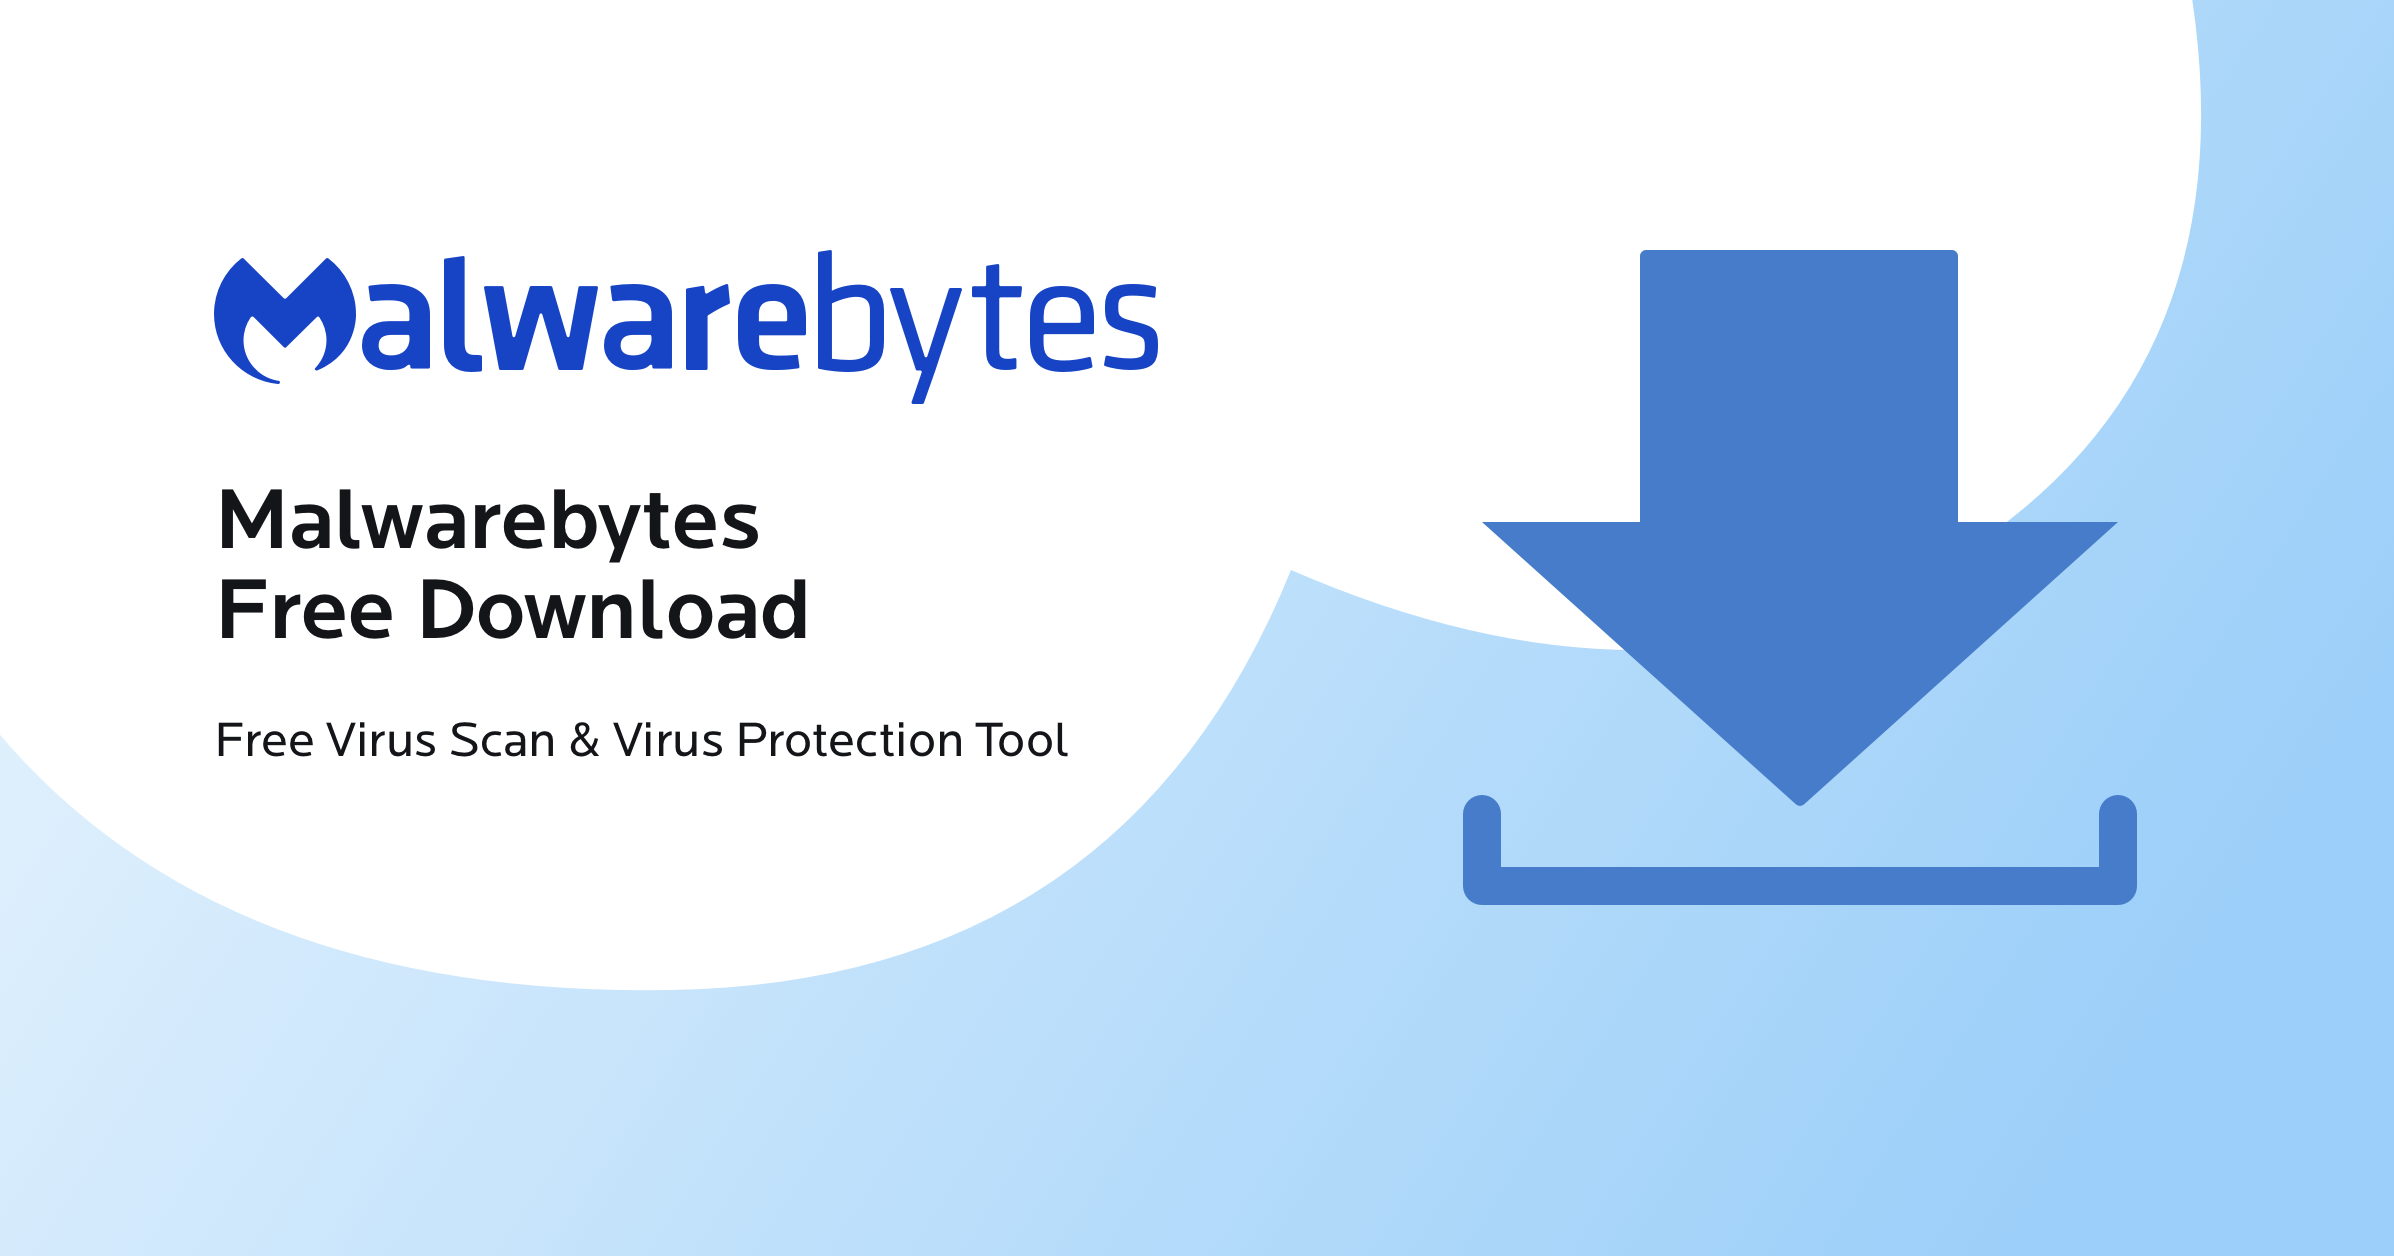 Install a reliable antivirus or anti-malware software
Perform a full system scan to detect and remove any BARBIE.EXE related files or infections